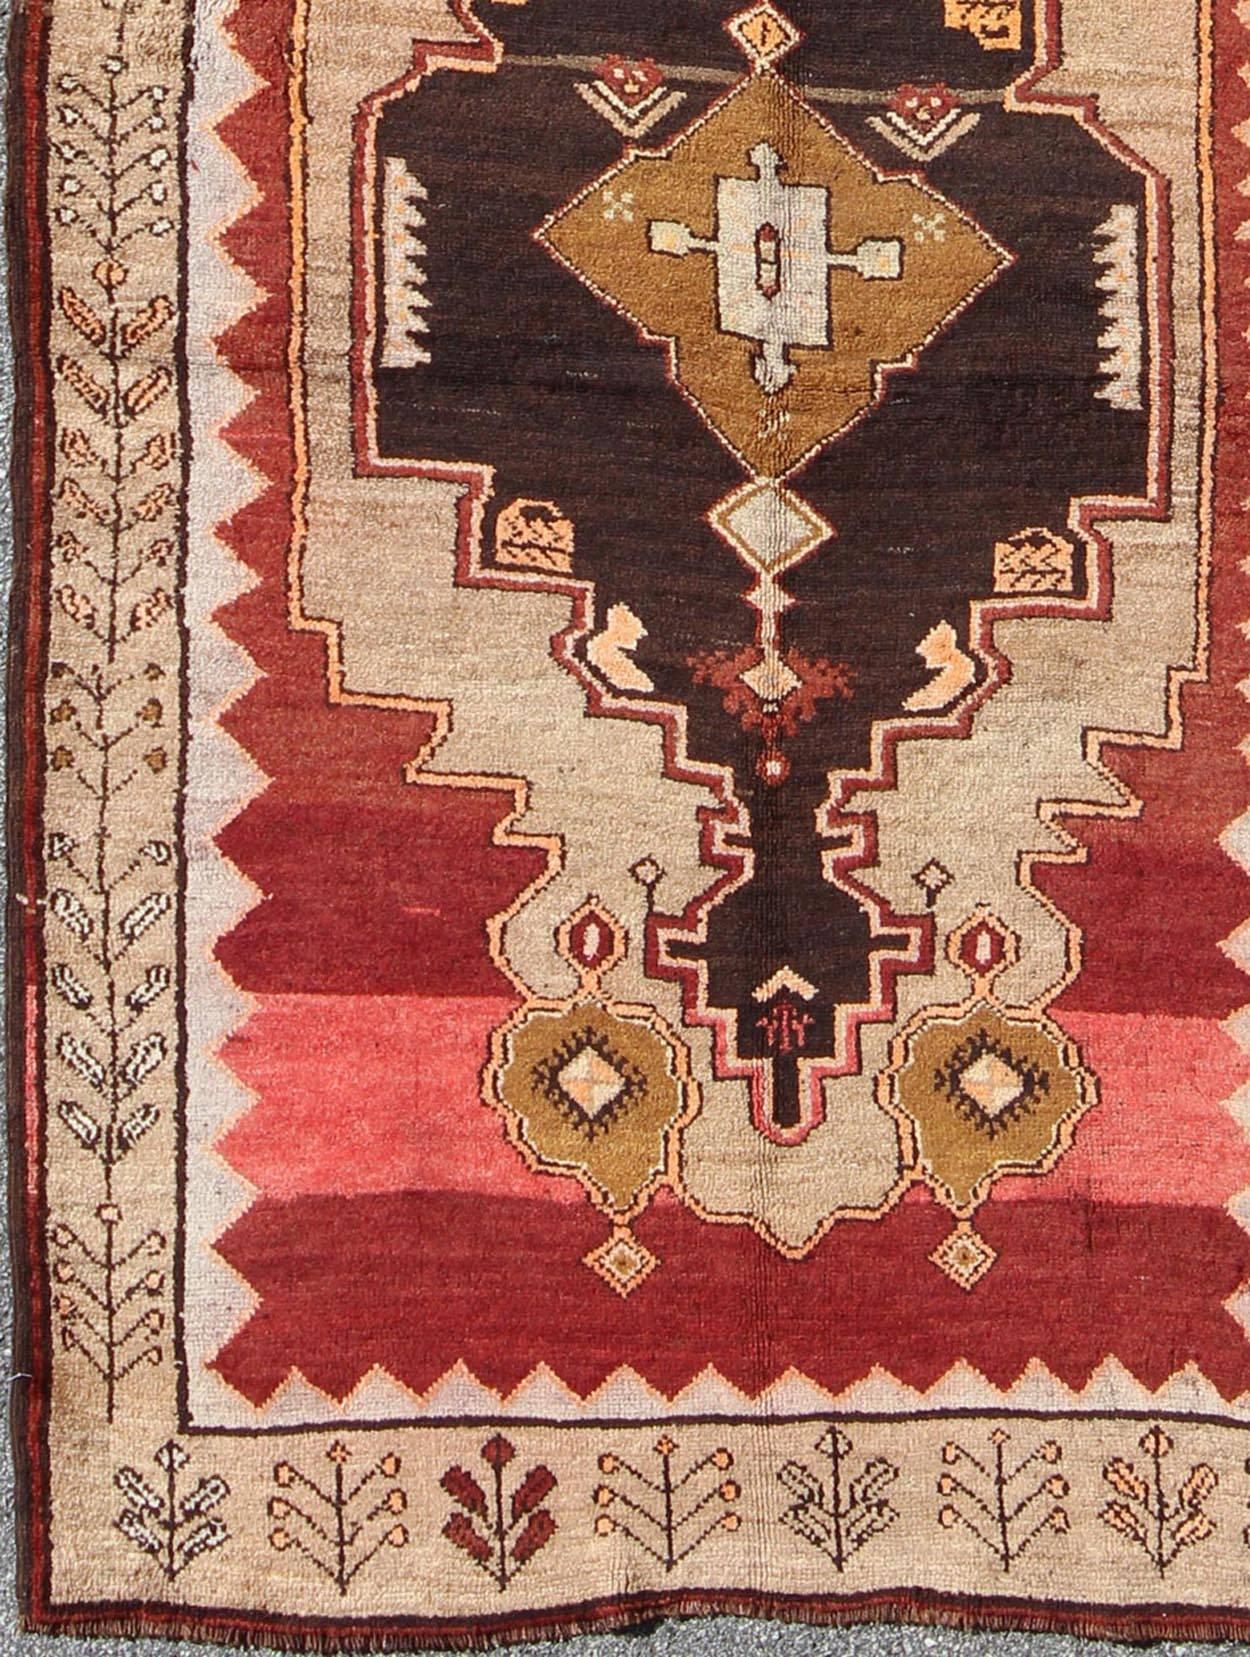 Tribal Turkish Rug from Turkey with Medallion Design 
 rug-tu-trs-136083  origin/turkey

This Turkish gallery rug features a dual central medallion design as well as patterns of smaller geometric and tribal elements. Colors include various shades of